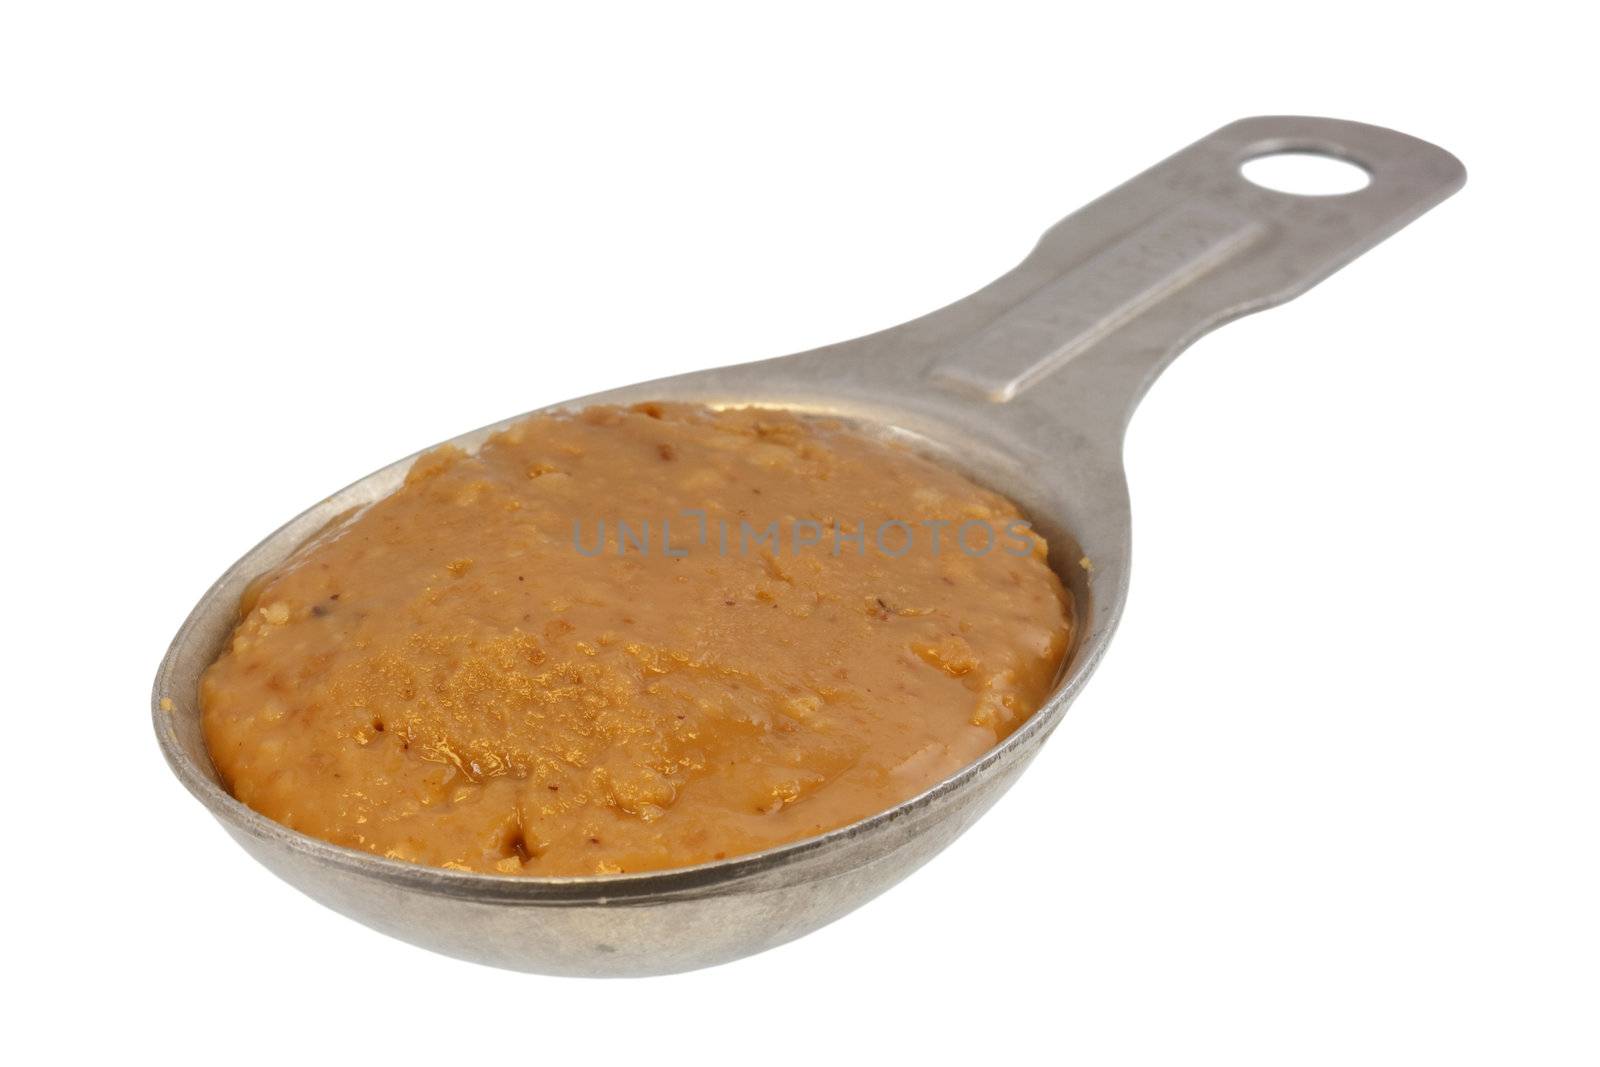 tablespoon of creamy peanut butter by PixelsAway